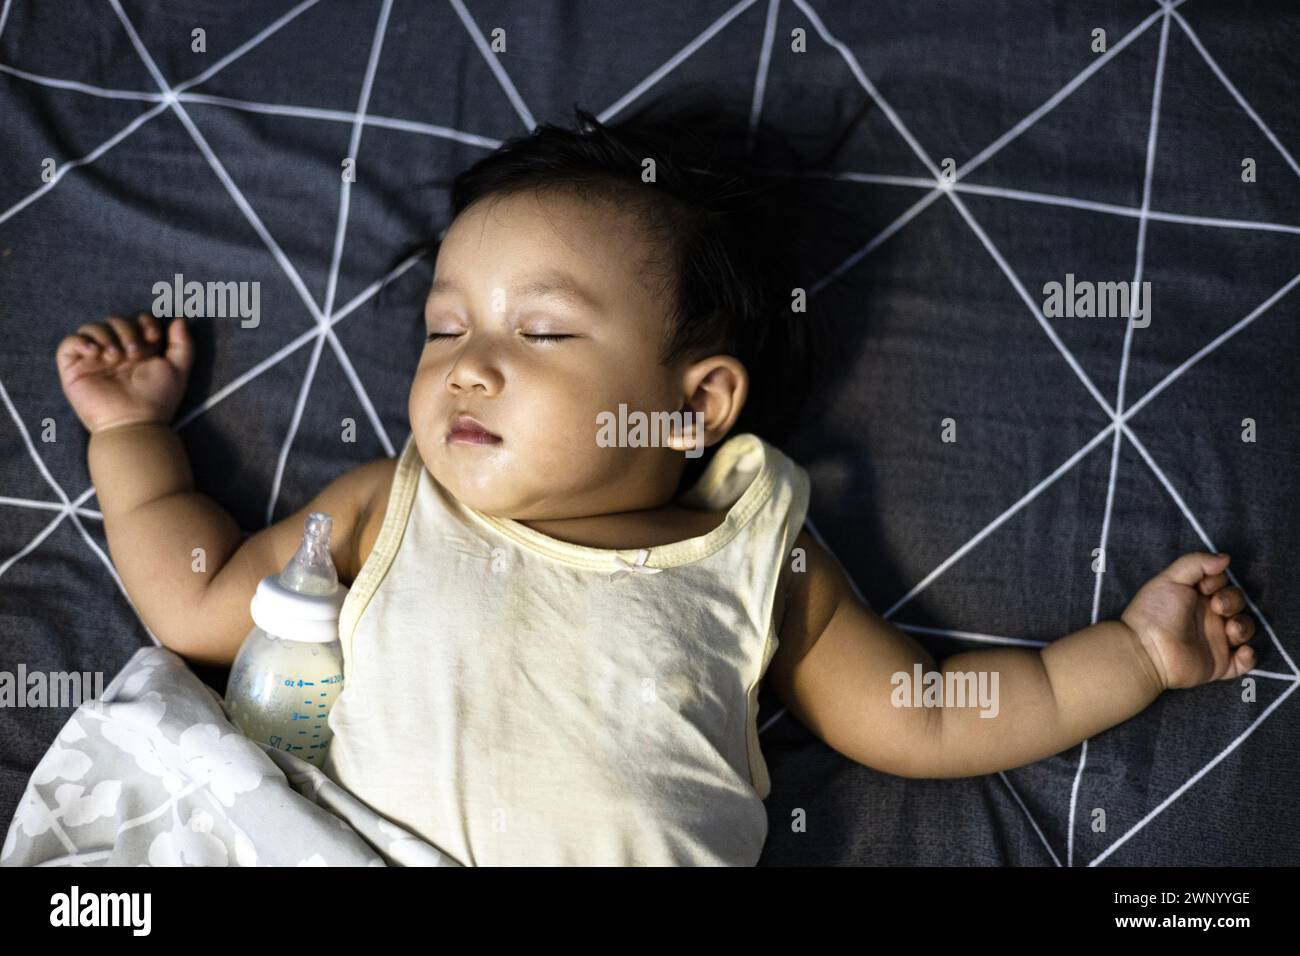 Baby sleeping on a bed after drinking bottle milk. baby boy sleeping with bottle with formula milk. Stock Photo